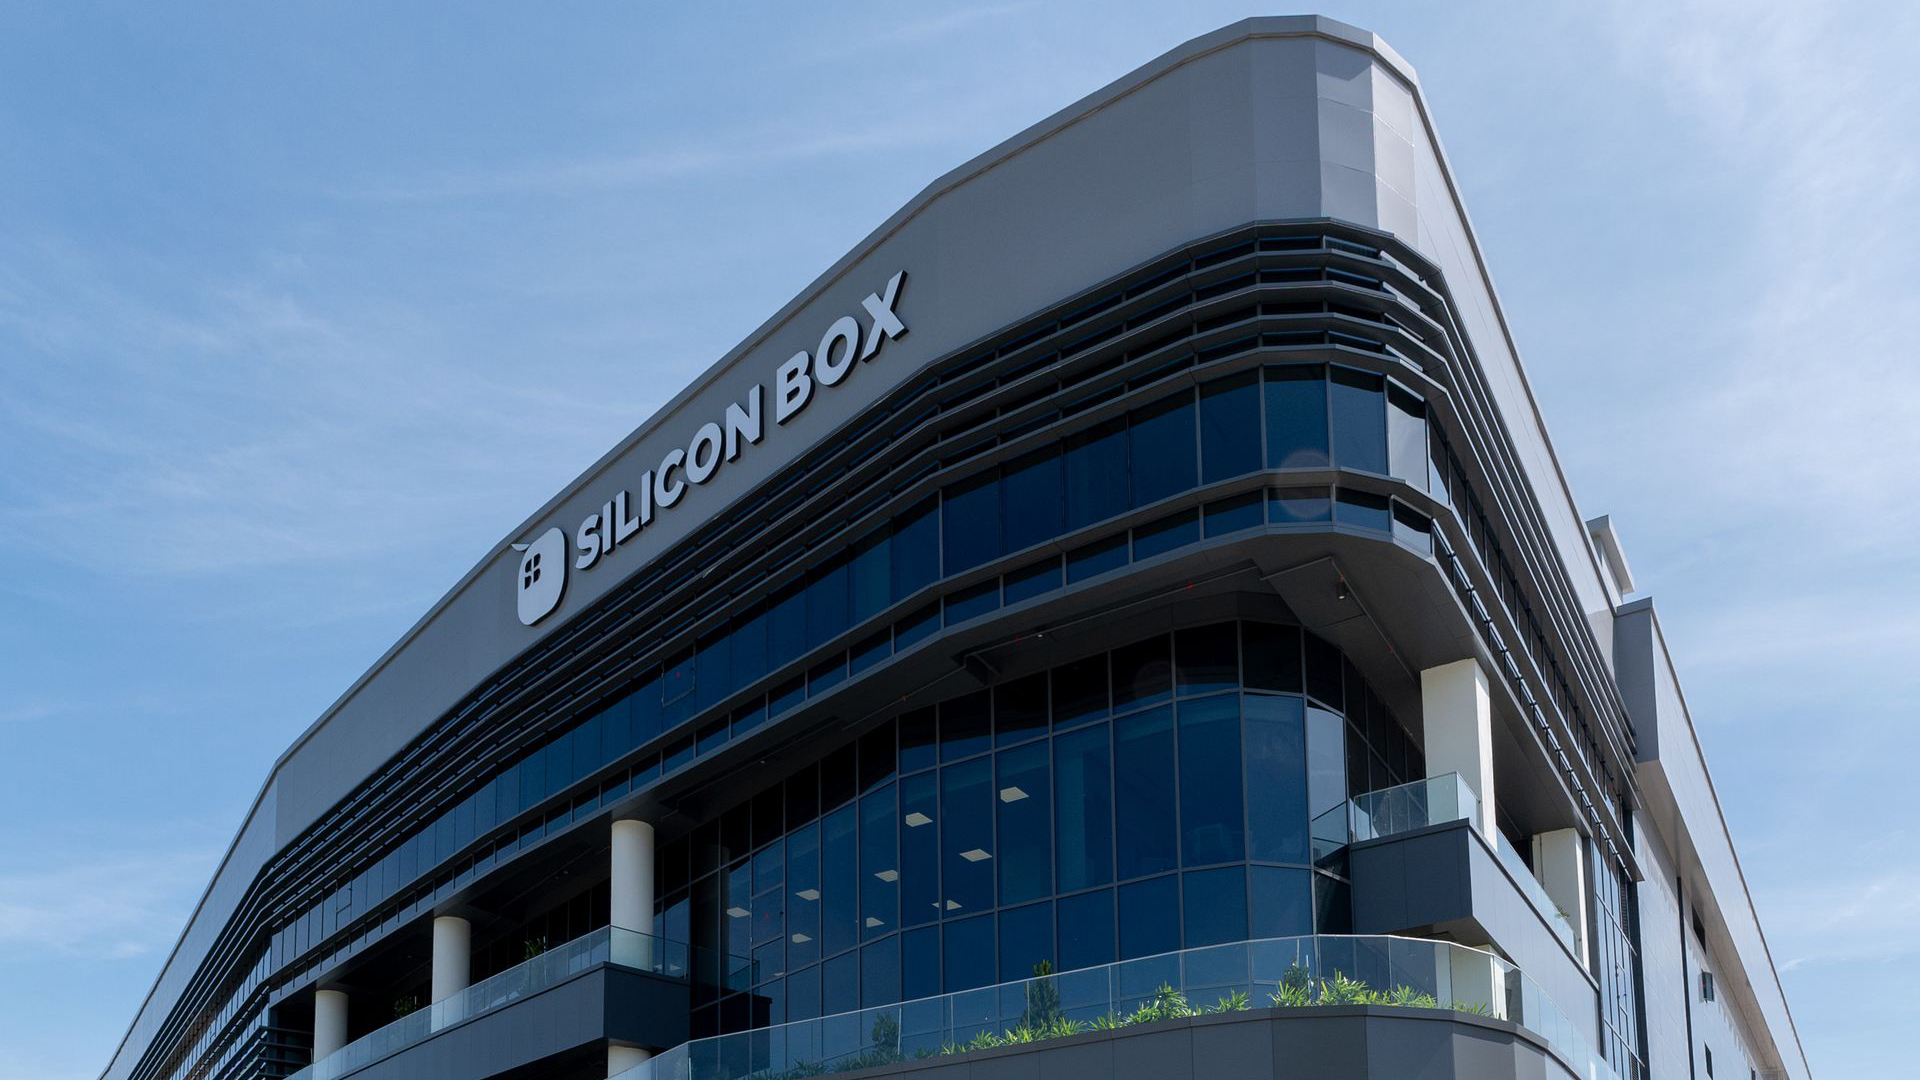 Singapore’s Silicon Box to build $3.5b AI chip factory in Italy